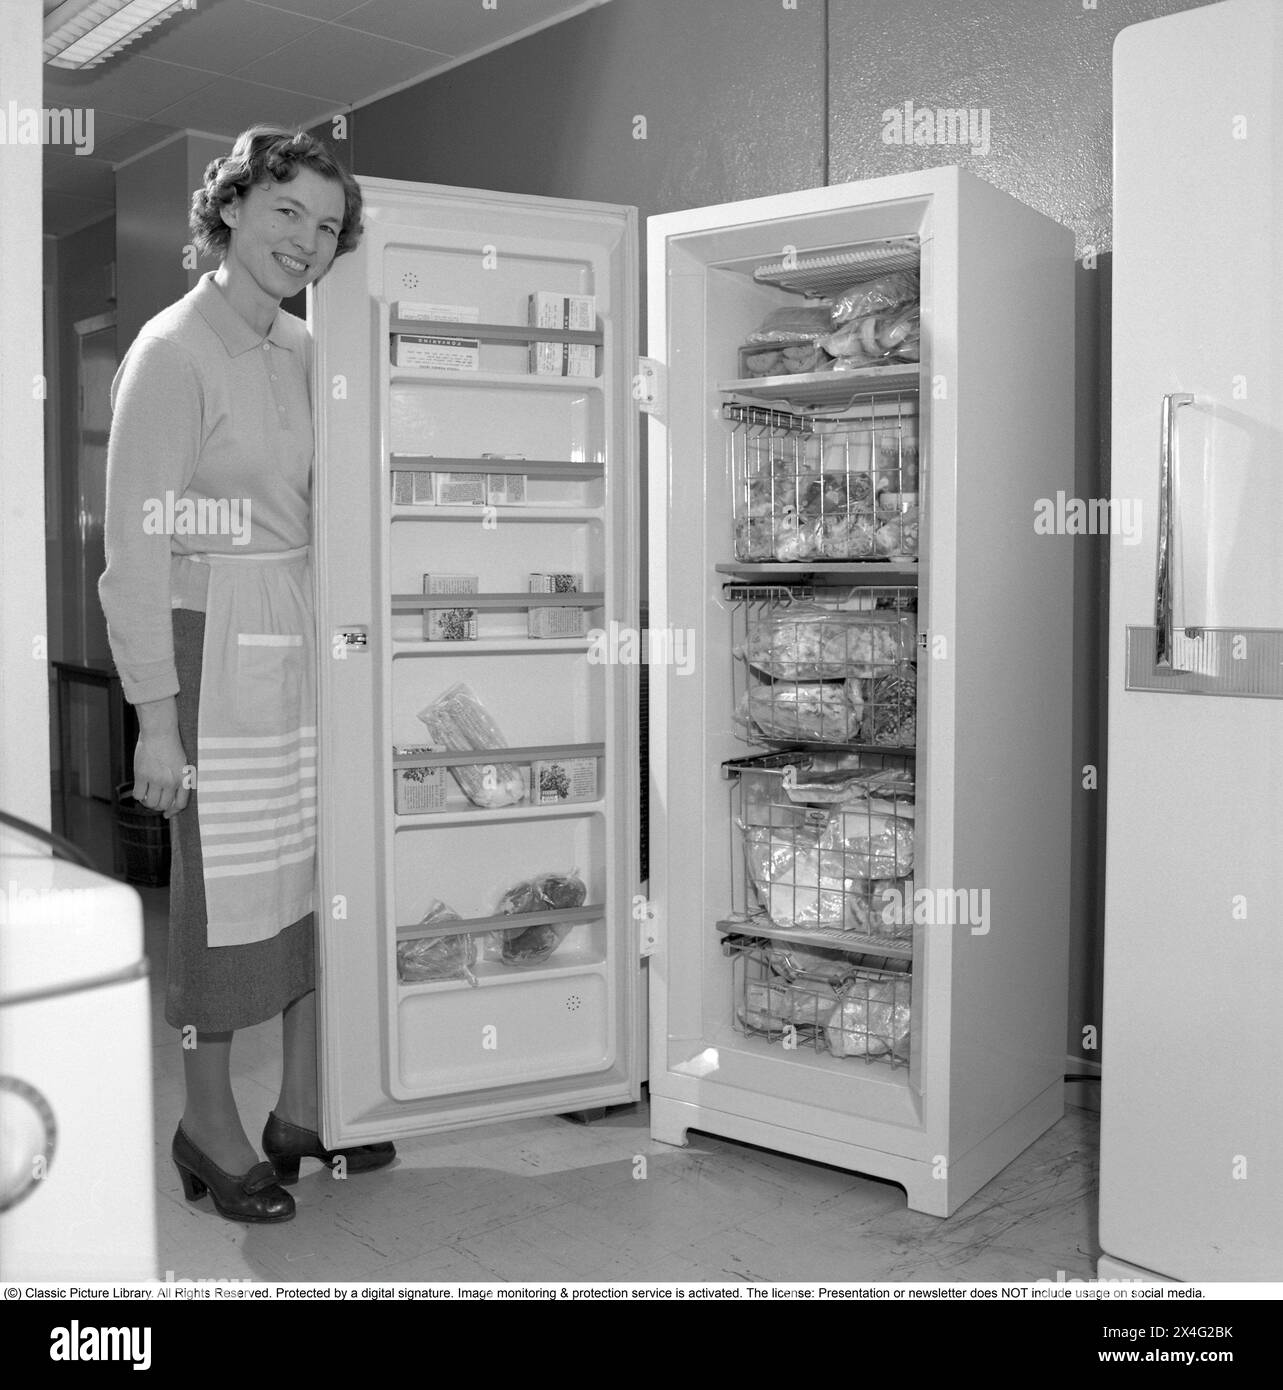 A woman at a freezer with frozen goods, chicken, fish in packages.  A standing model freezer with shelves and drawers and a door to open it. Sweden 1960. Conard 4188 Stock Photo